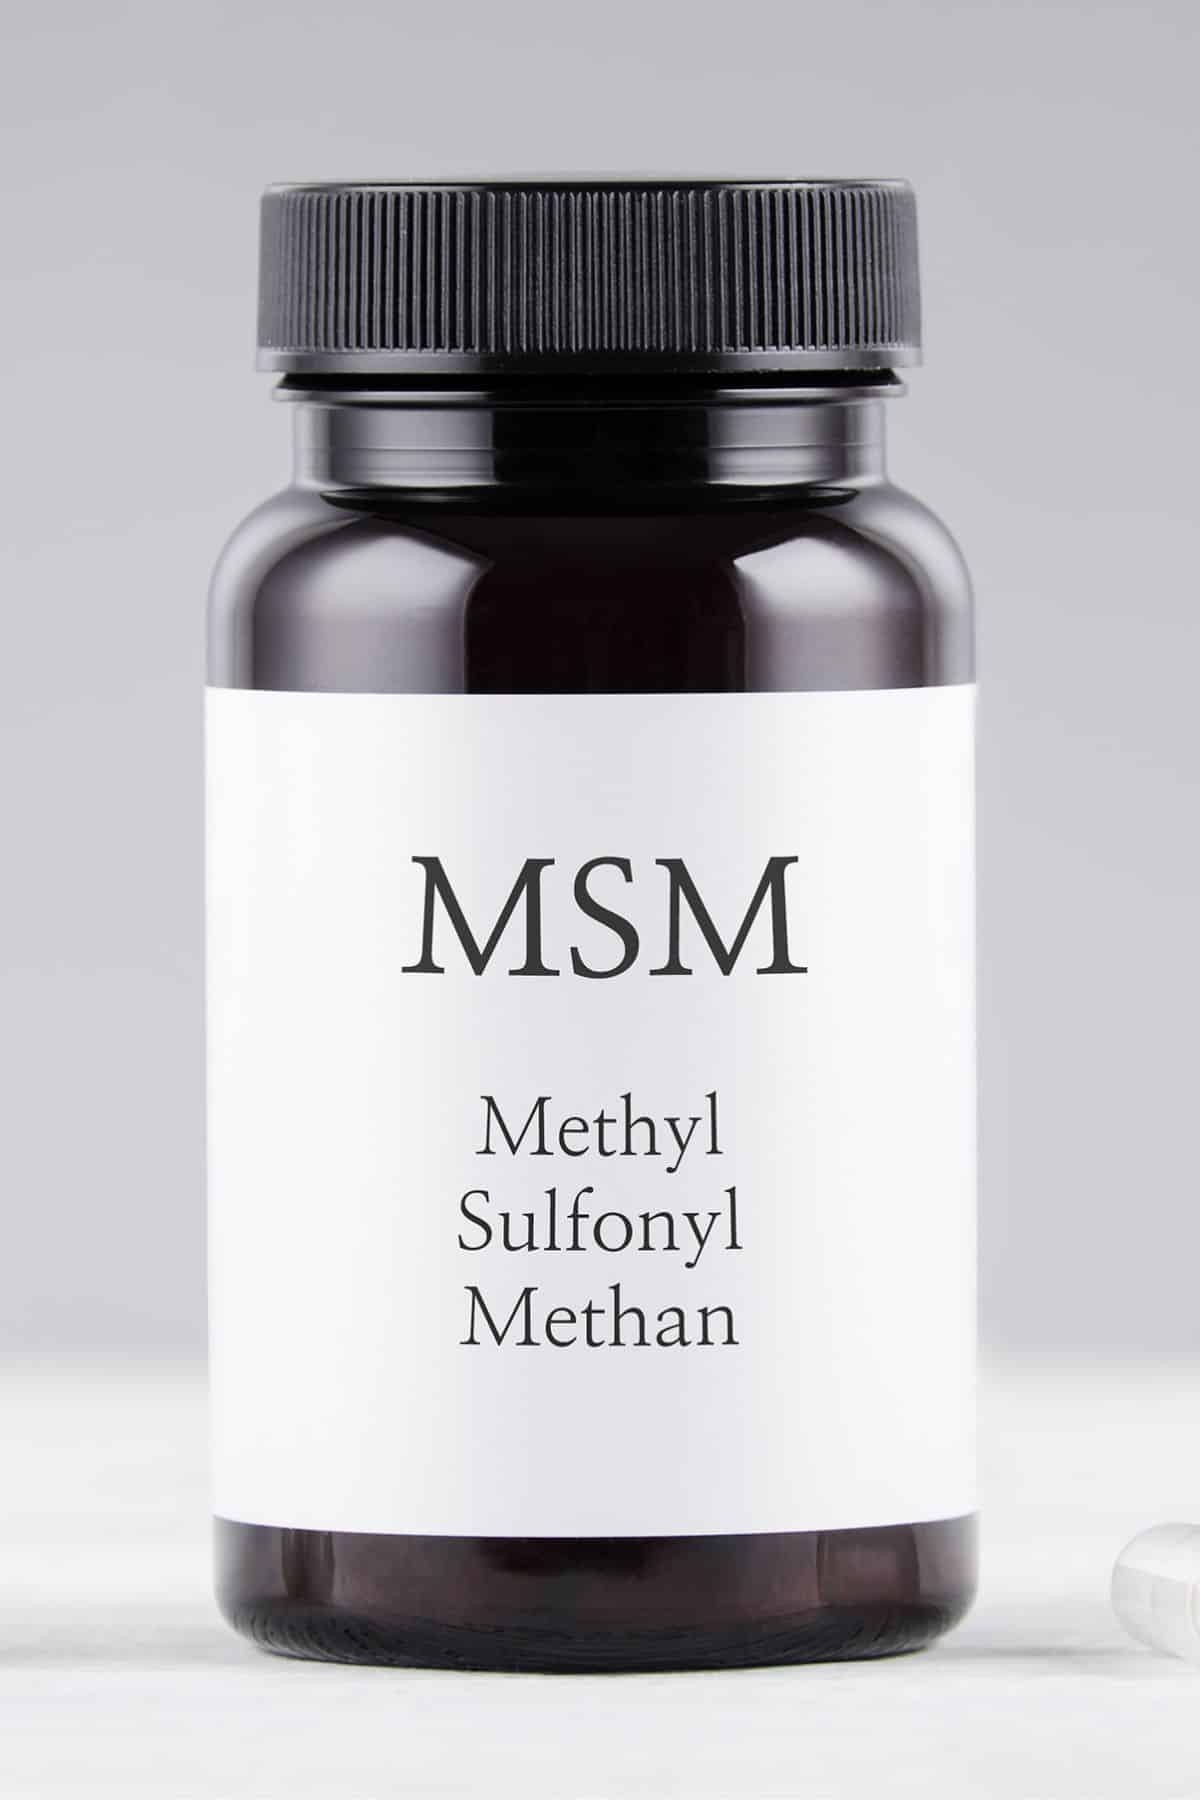 a bottle of the supplement MSM.